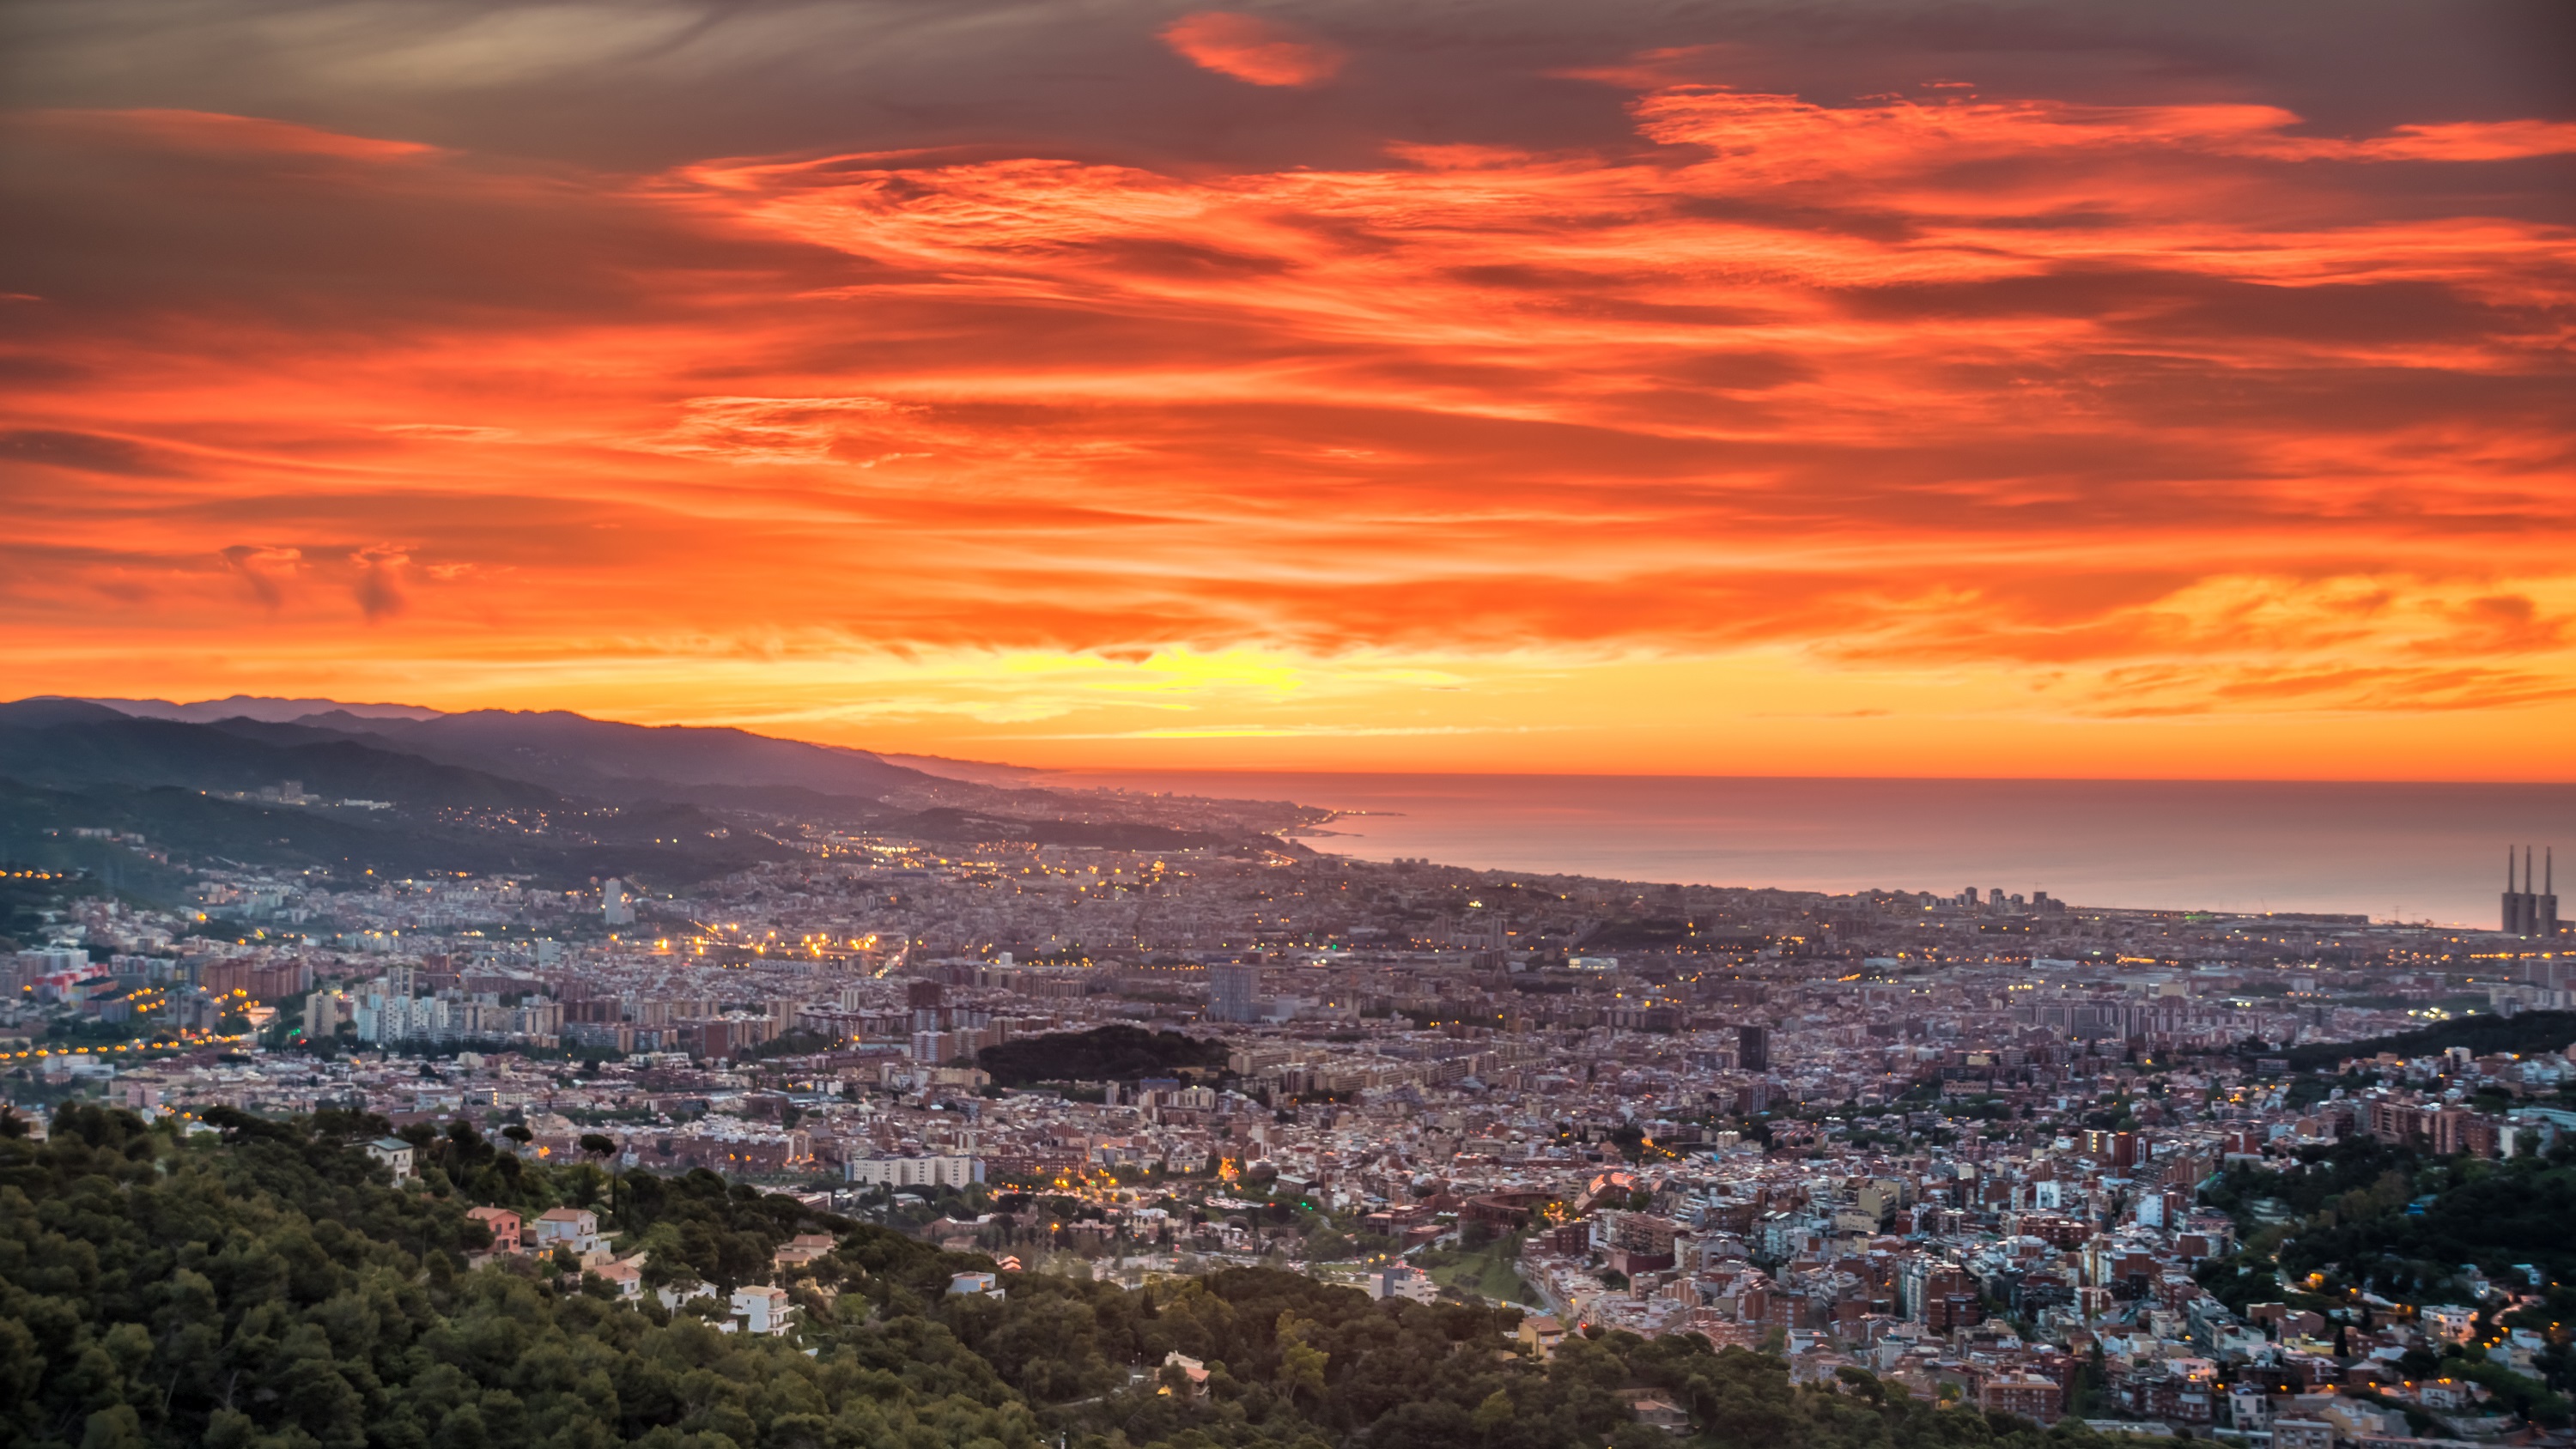 3rd Place Stunning sunrise from Barcelona, Fabra Observatory by Alfons Puertas @alfons_pc